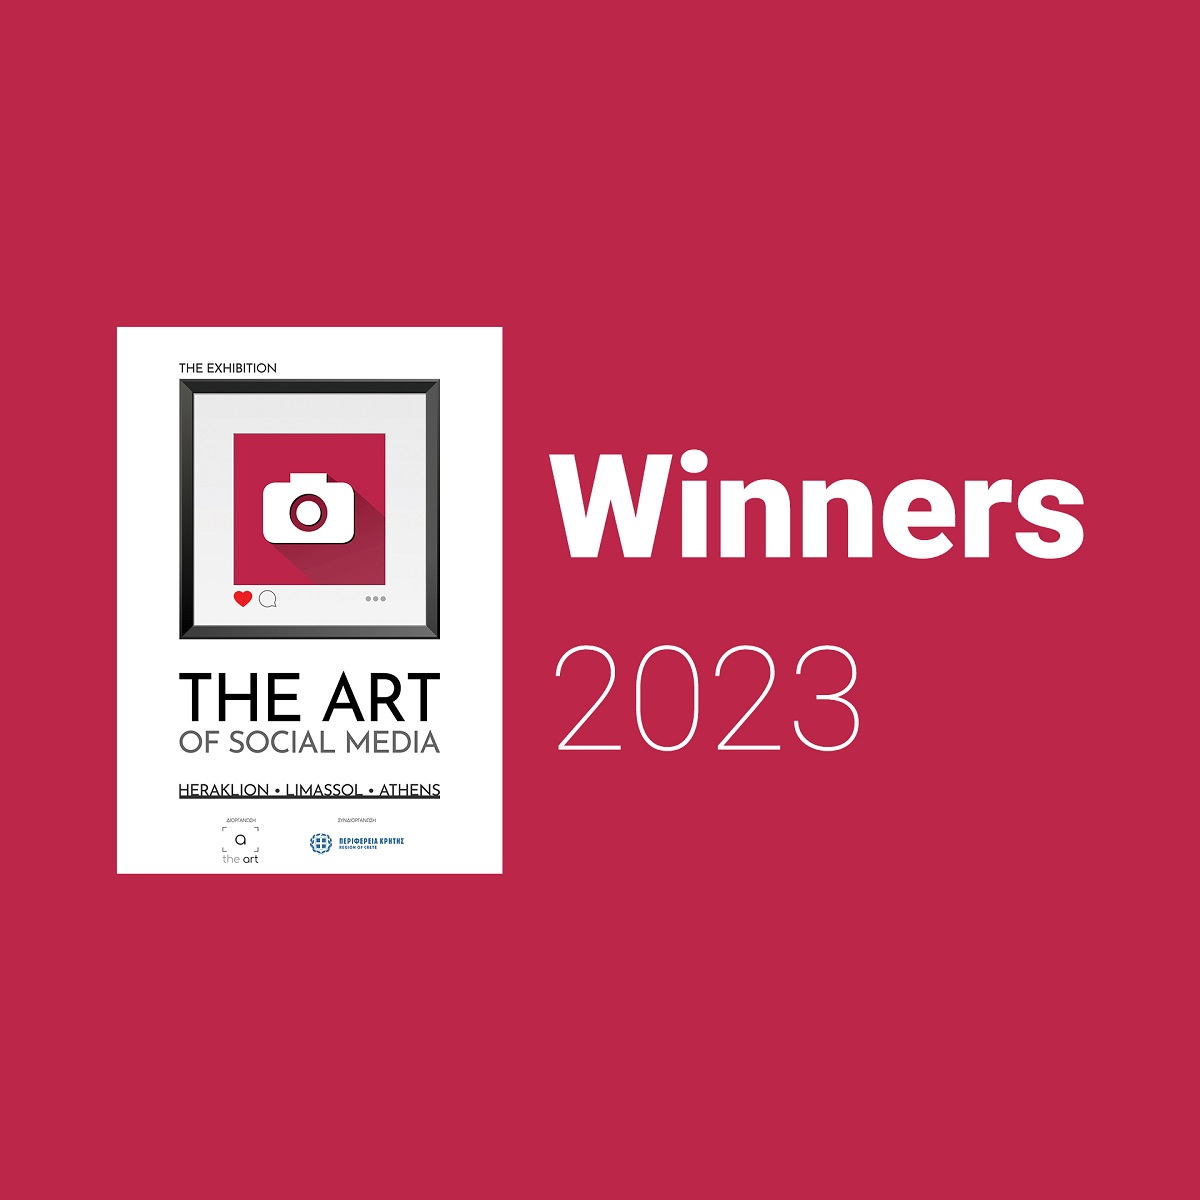 The video with the winning photos of The Art of Social Media 2023